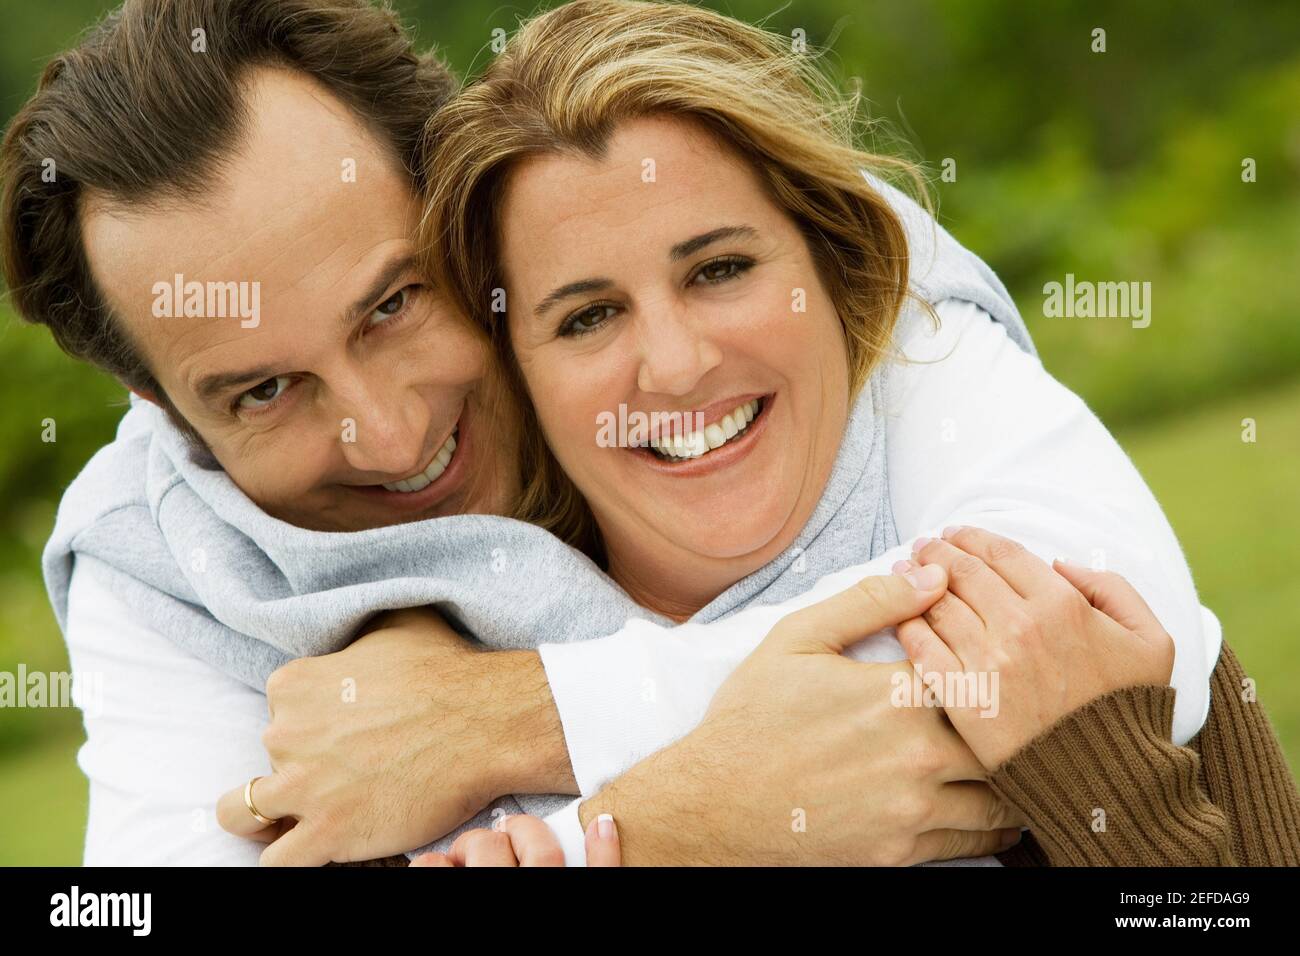 Portrait of a mature man embracing a mid adult woman from behind Stock Photo